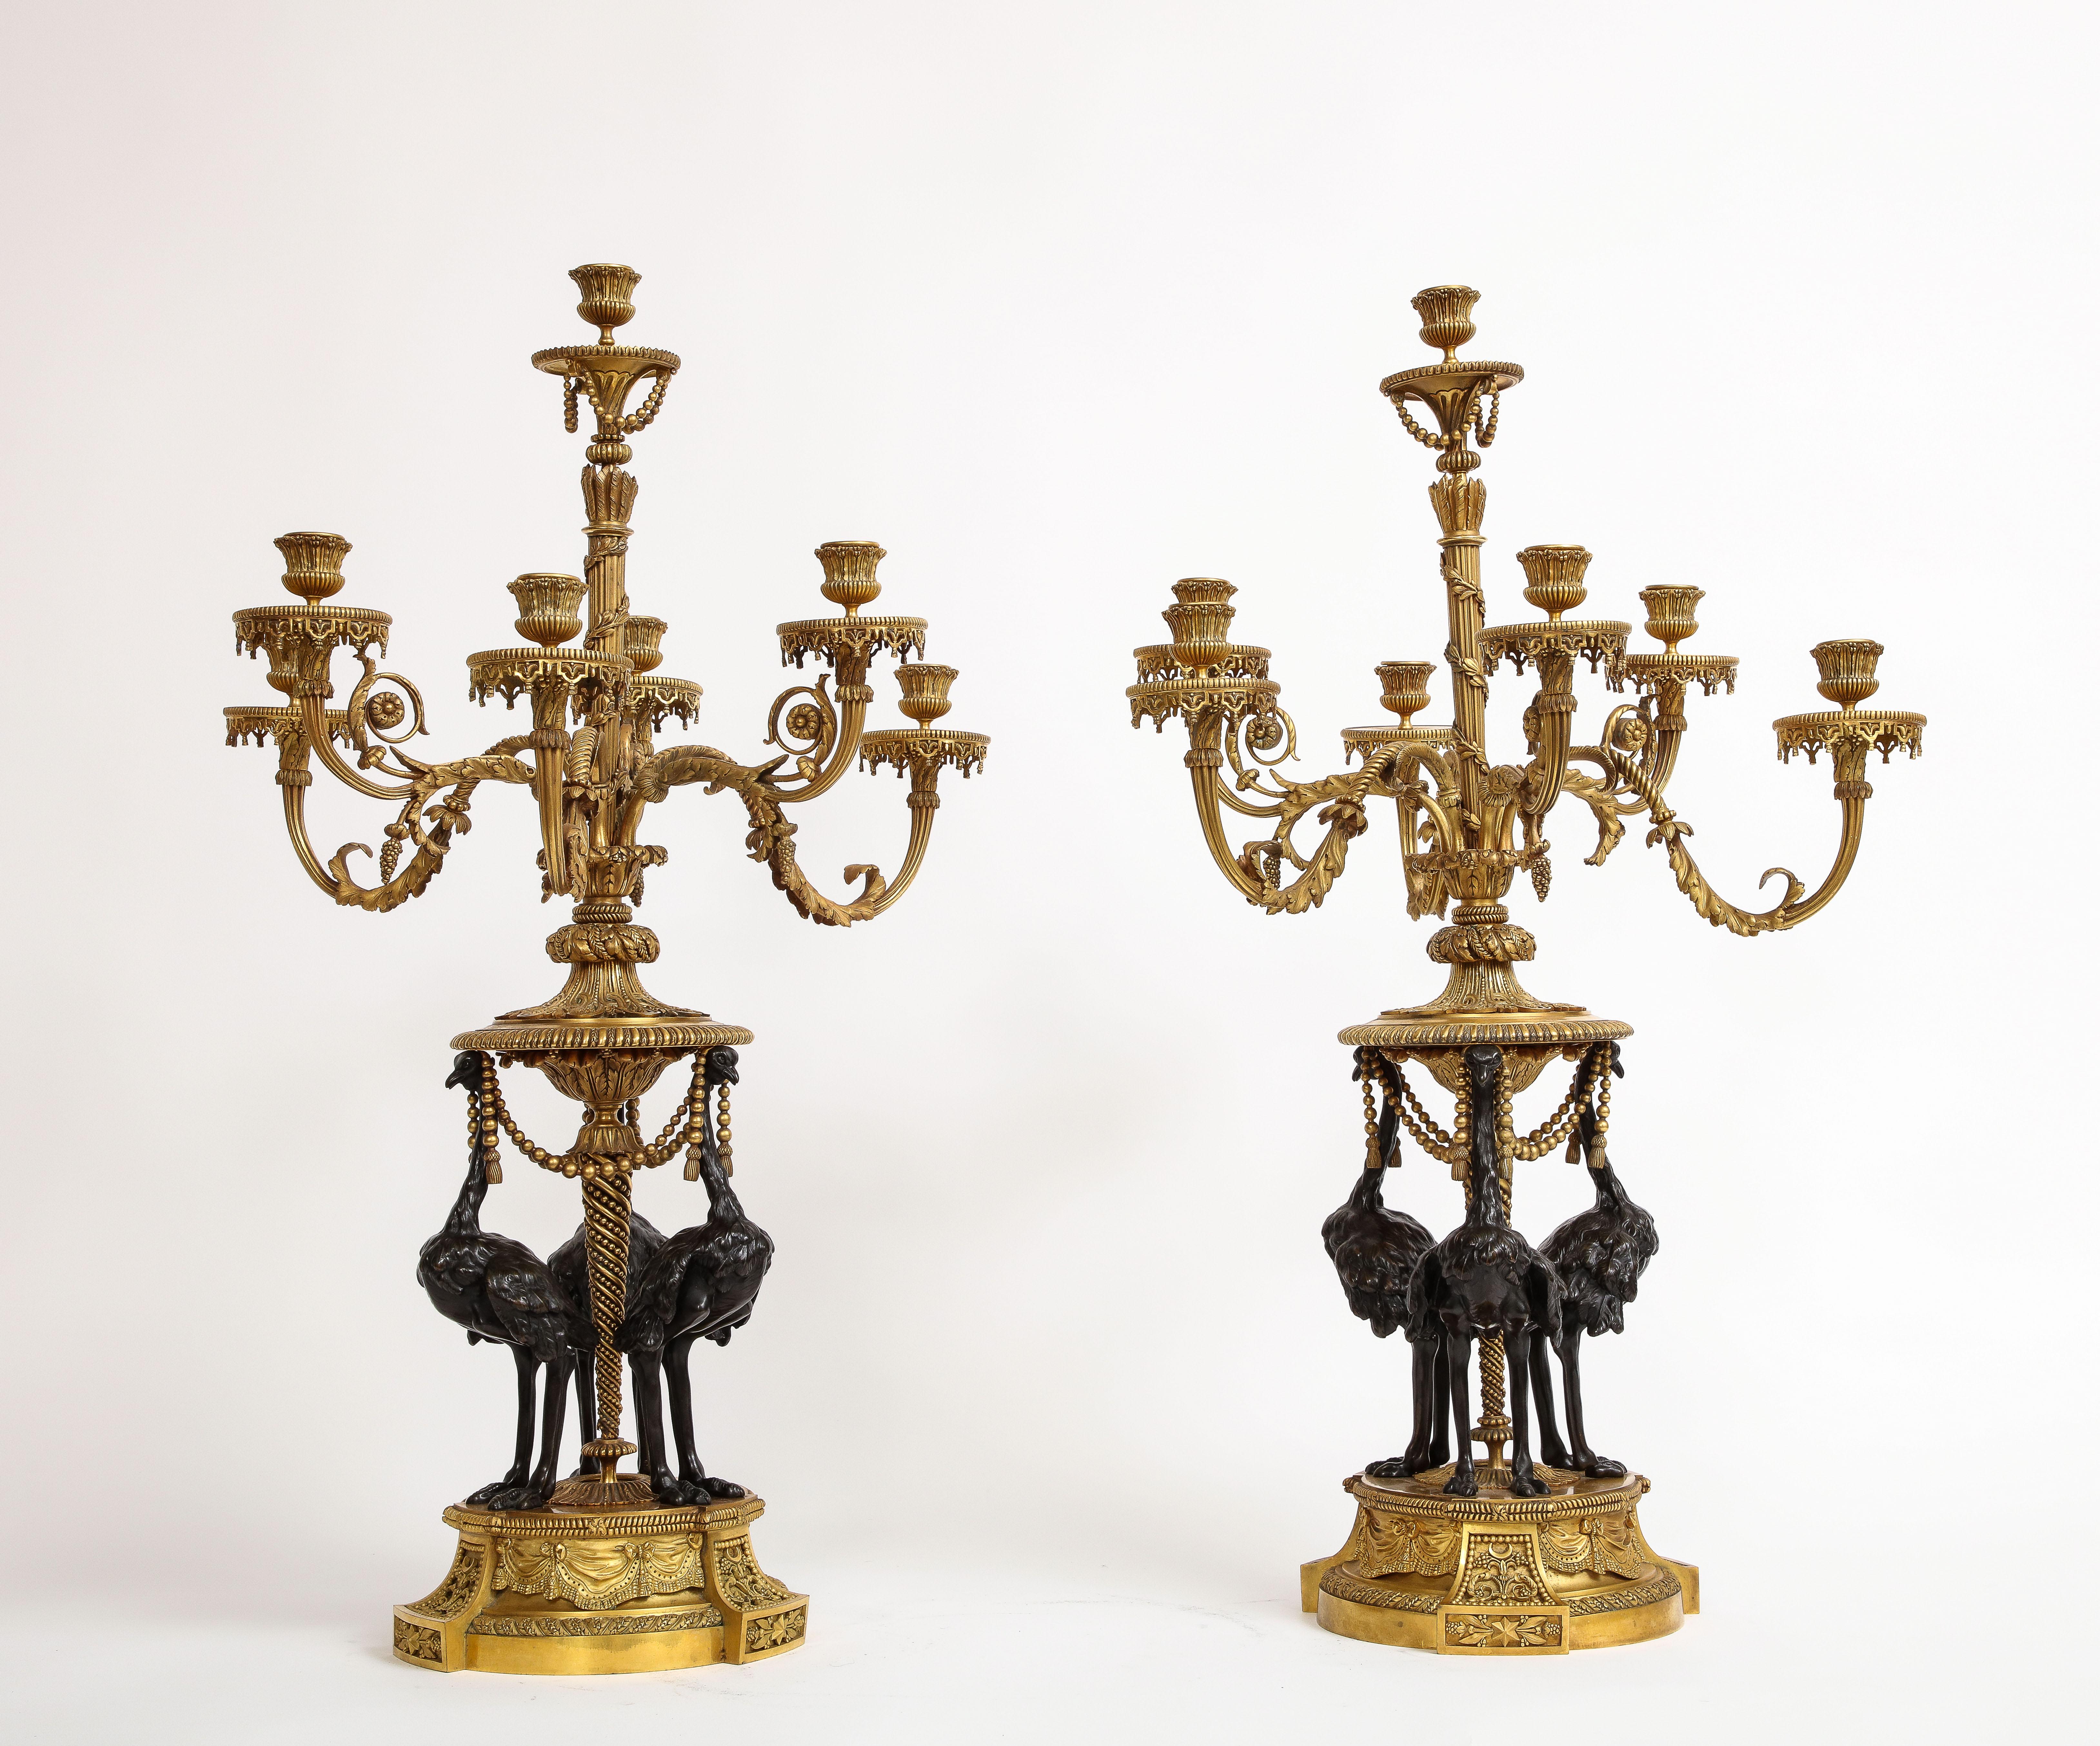 An Extremally Rare and Large Pair of 19th Century French Louis XVI Style Ormolu and Patinated Bronze Seven-Arm Candelabra, by Alfred Beurdeley, Originally Designed by François Rémond. These extraordinary pieces serve as a testament to the epitome of